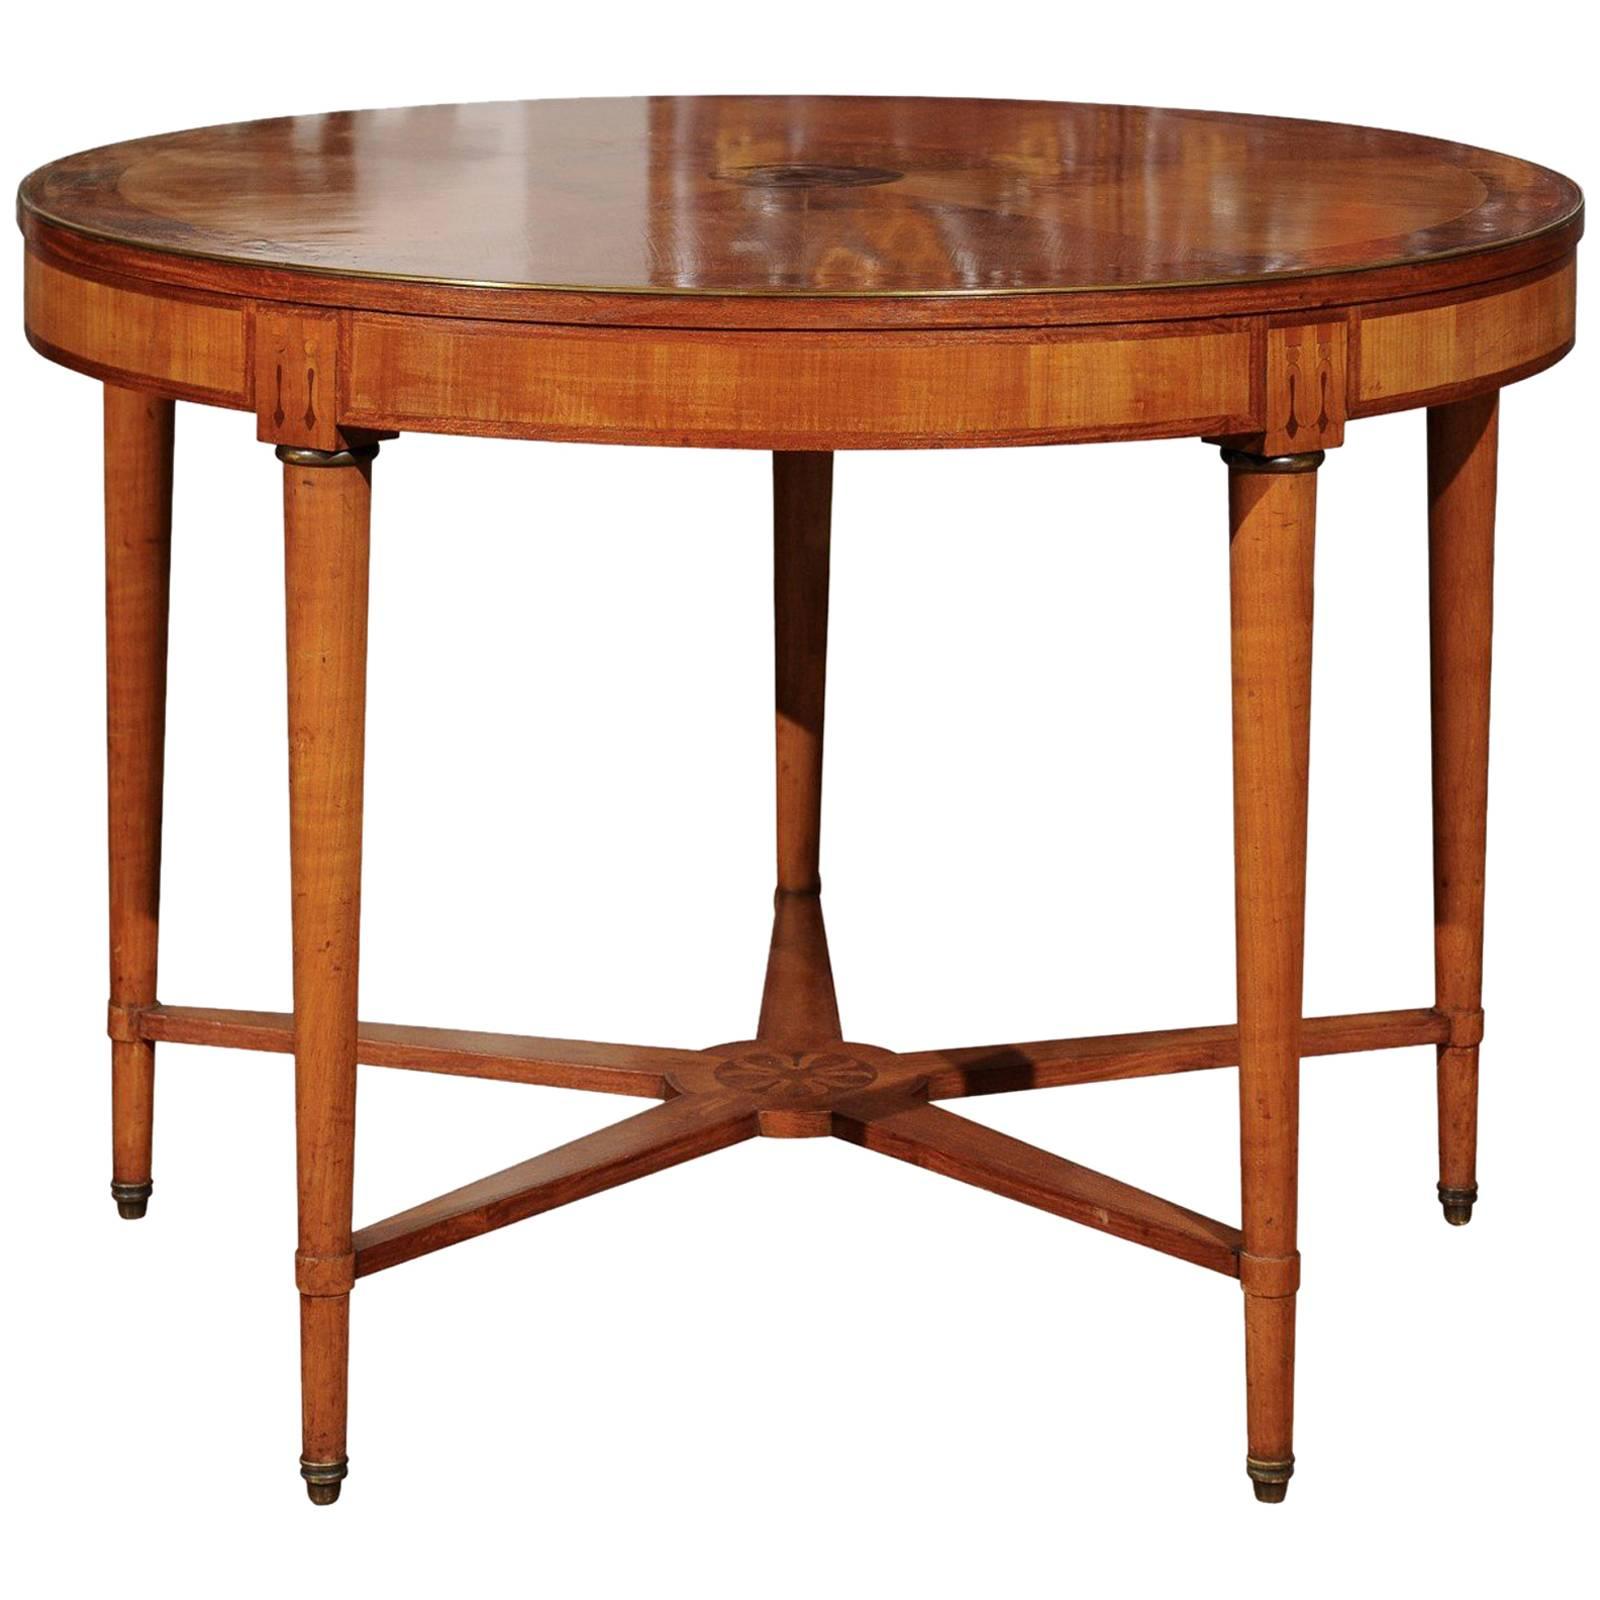 French 1880s Round Burl Walnut Inlaid Table with Star-Shaped Cross Stretcher